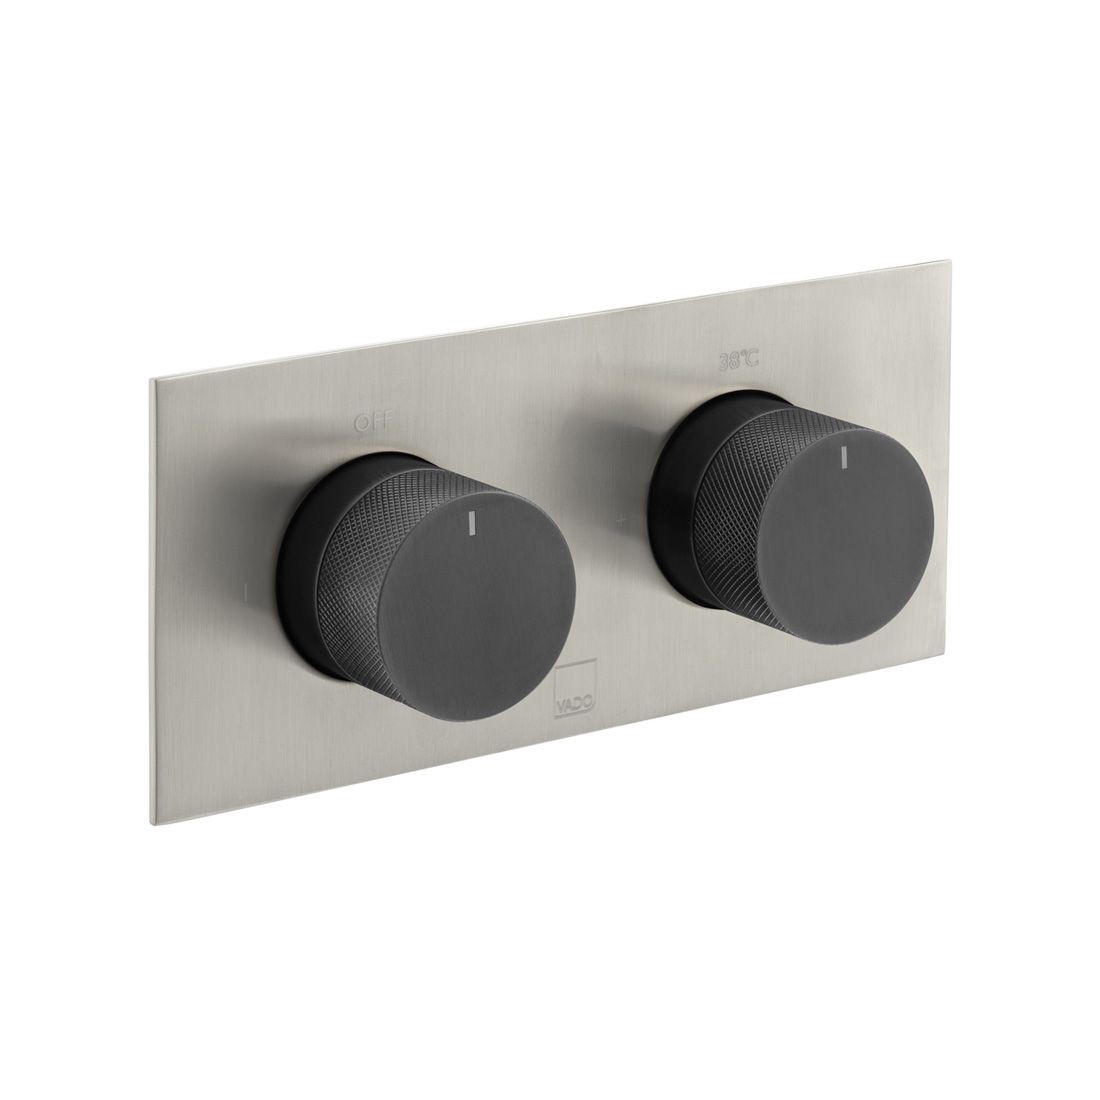 Individual by Vado X Fusion Thermostatic Shower Valve 2 Outlet Horizontal Brushed Nickel & Black [IND-T148/2-H-XNBK]